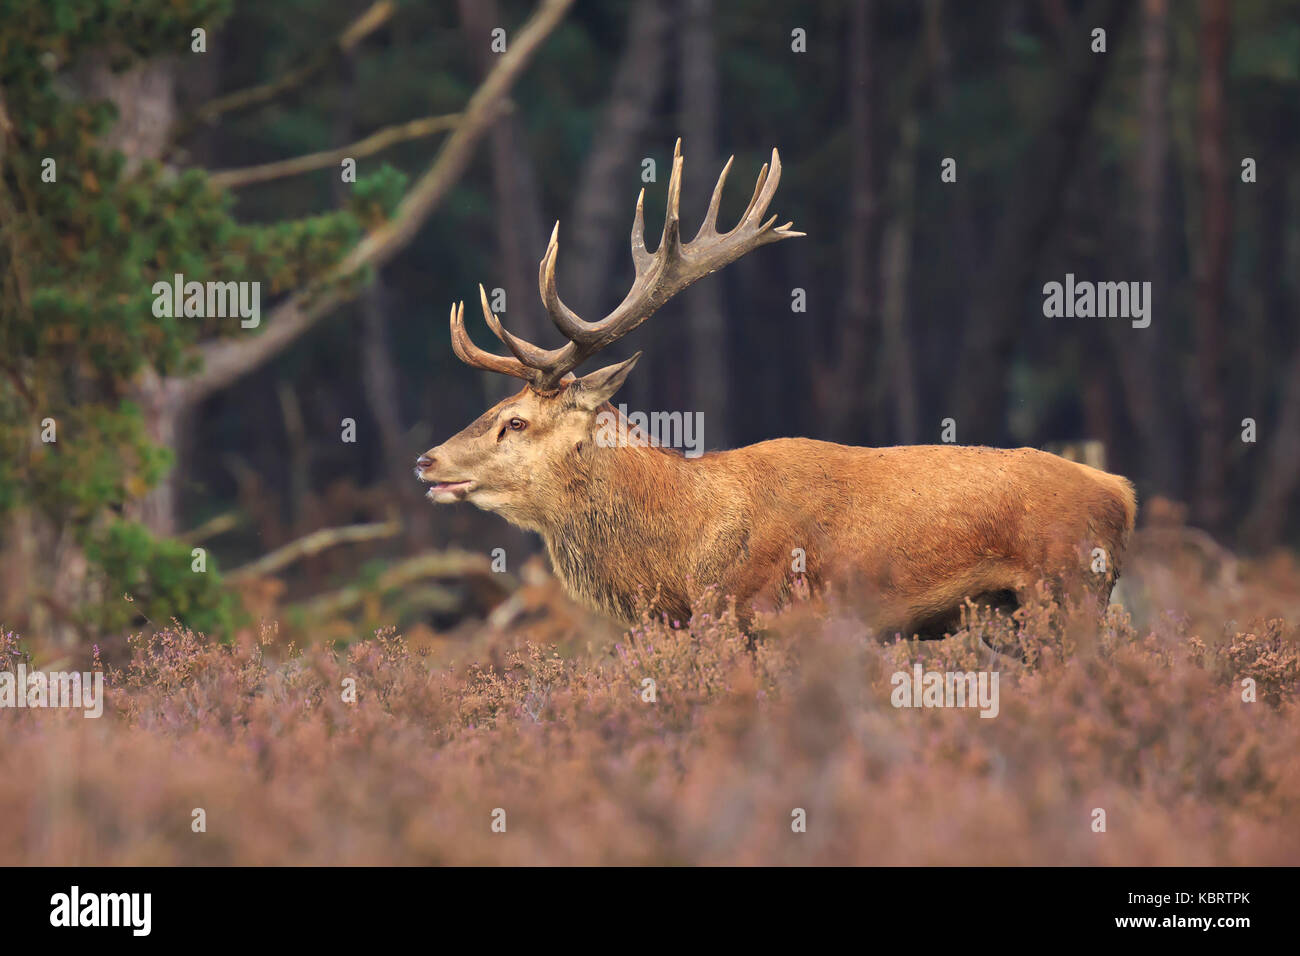 Red deer Cervus elaphus stag with big antlers roaring and rutting showing territorial behaviour during Autumn season. Stock Photo